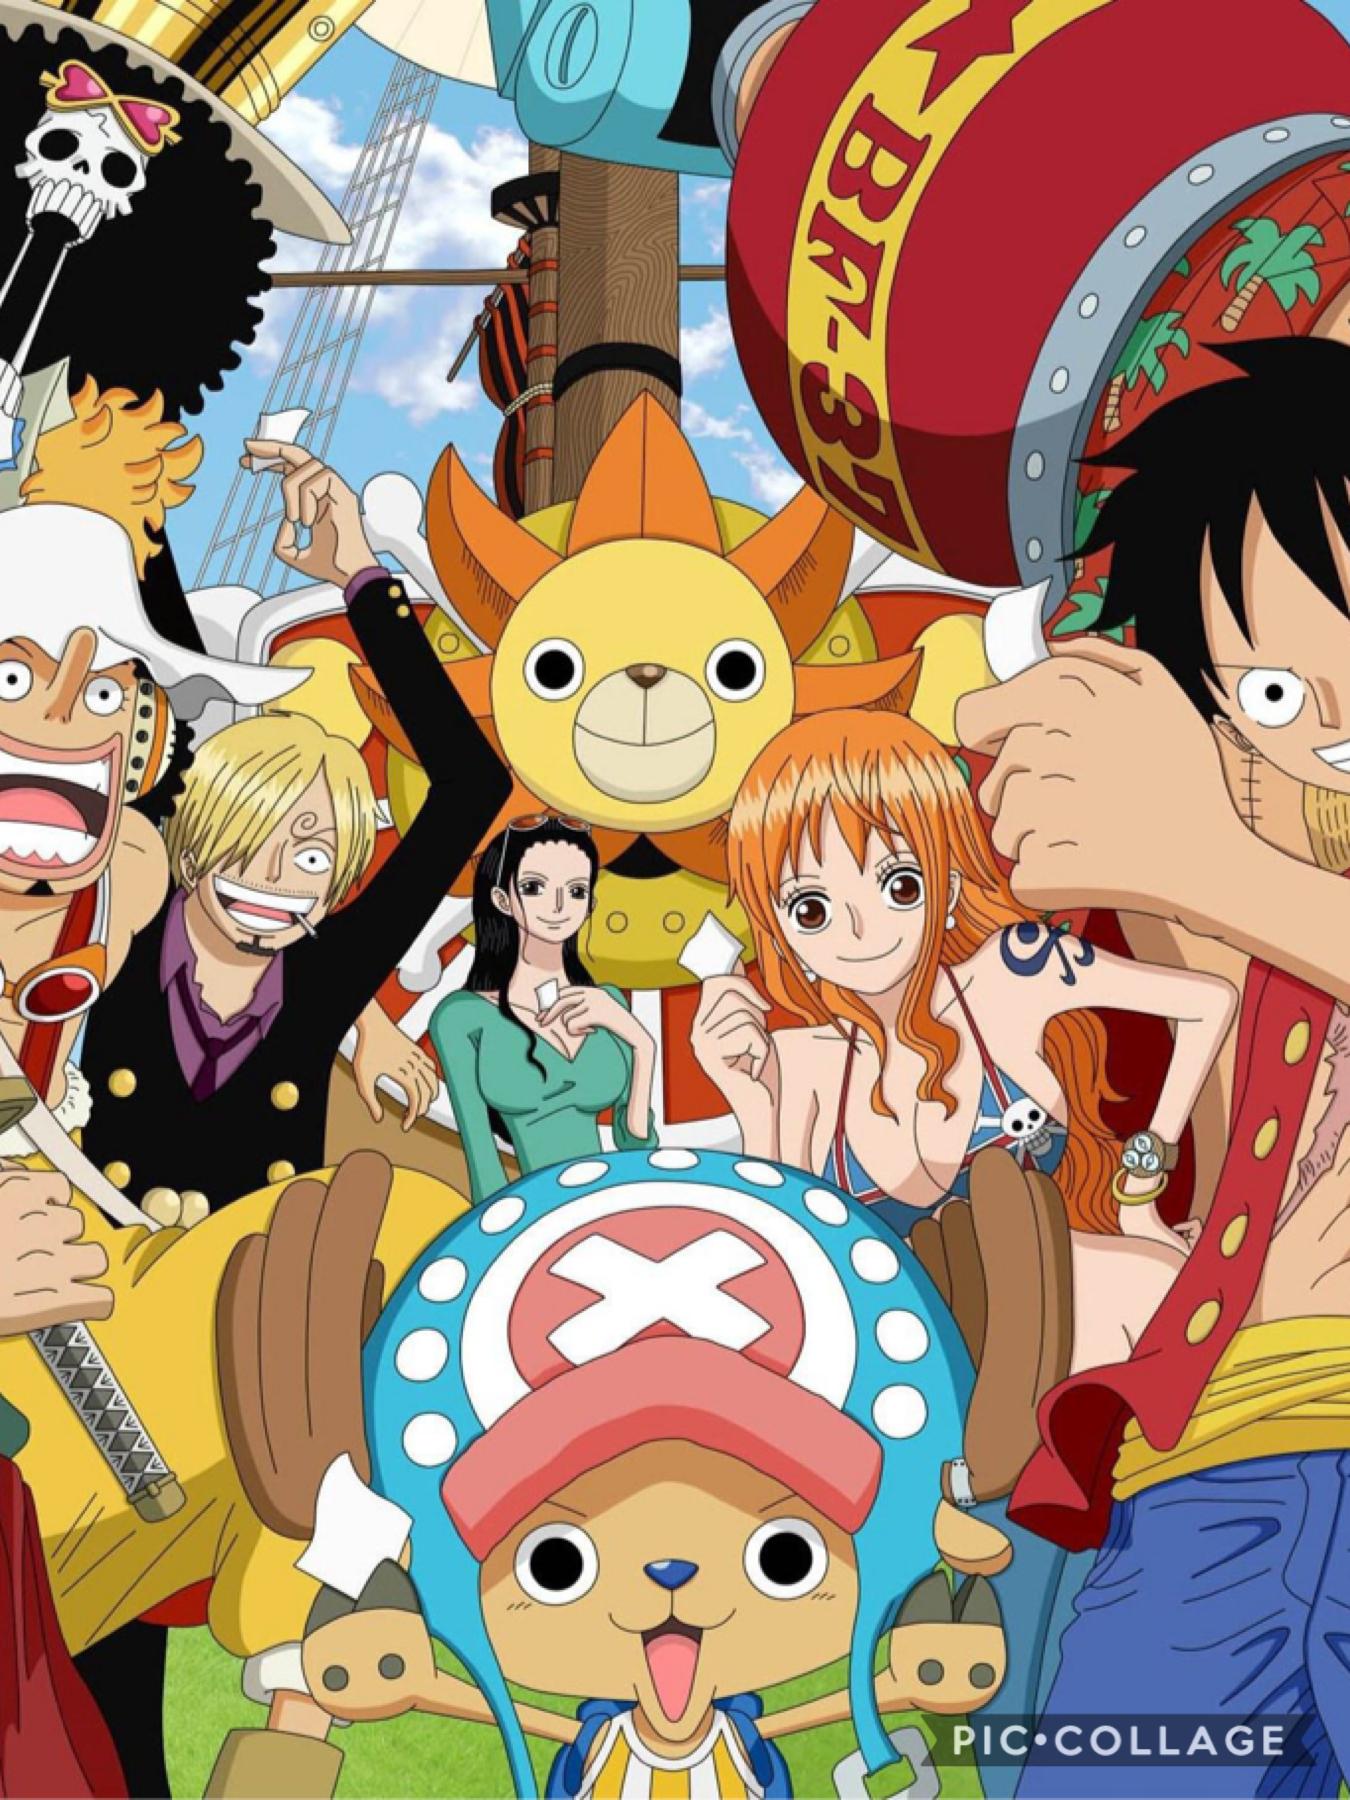 One piece : My favourite anime. It’s the best 